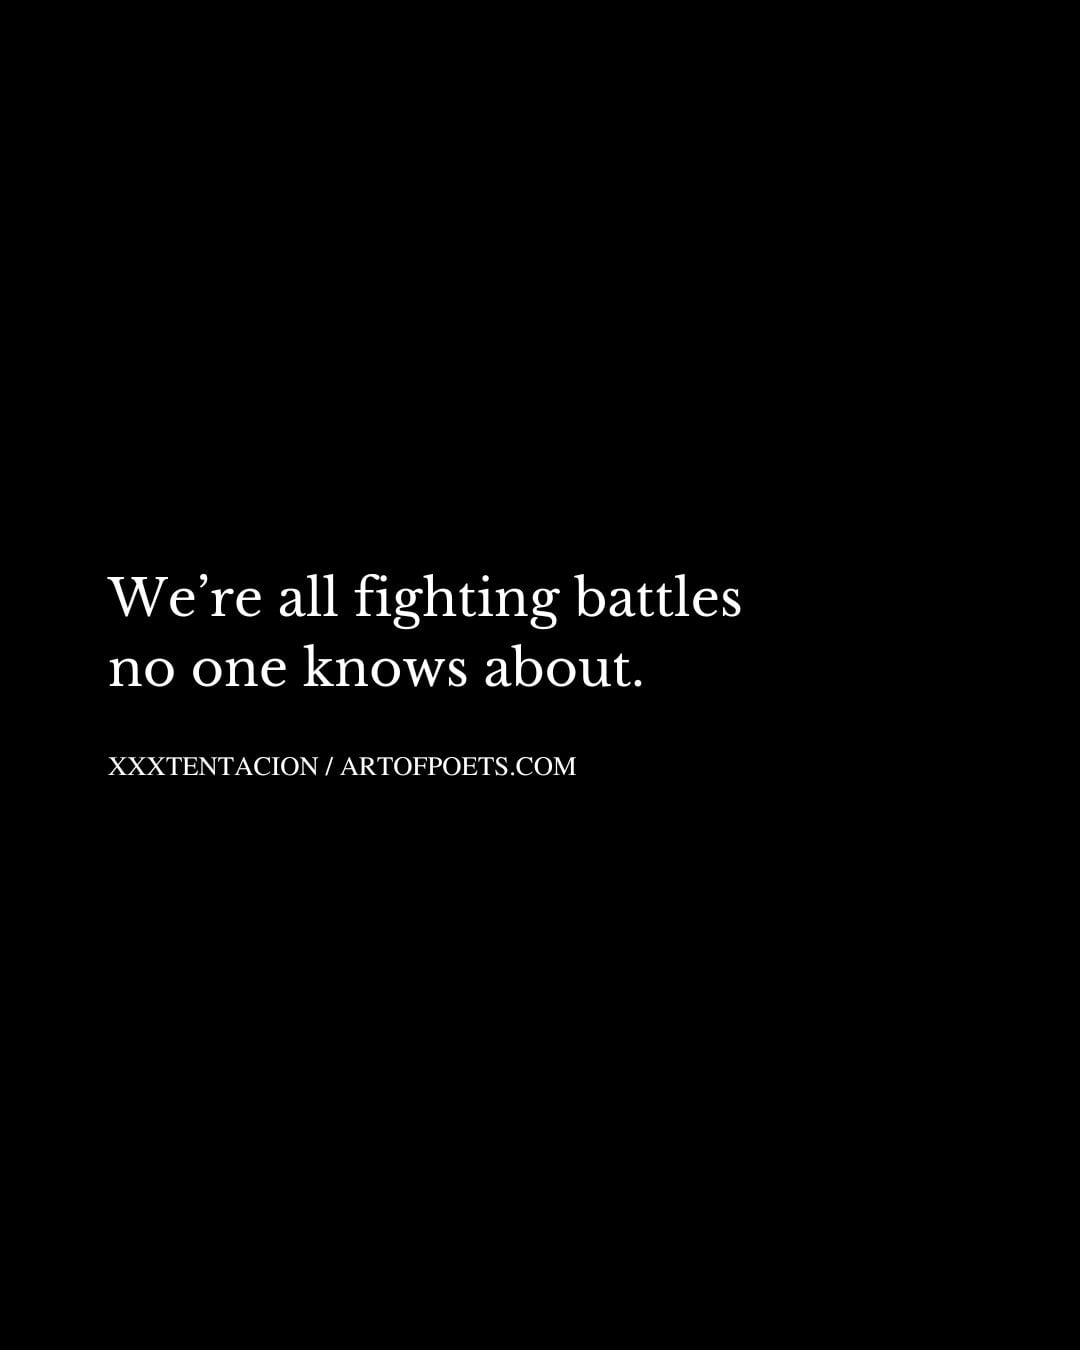 Were all fighting battles no one knows about